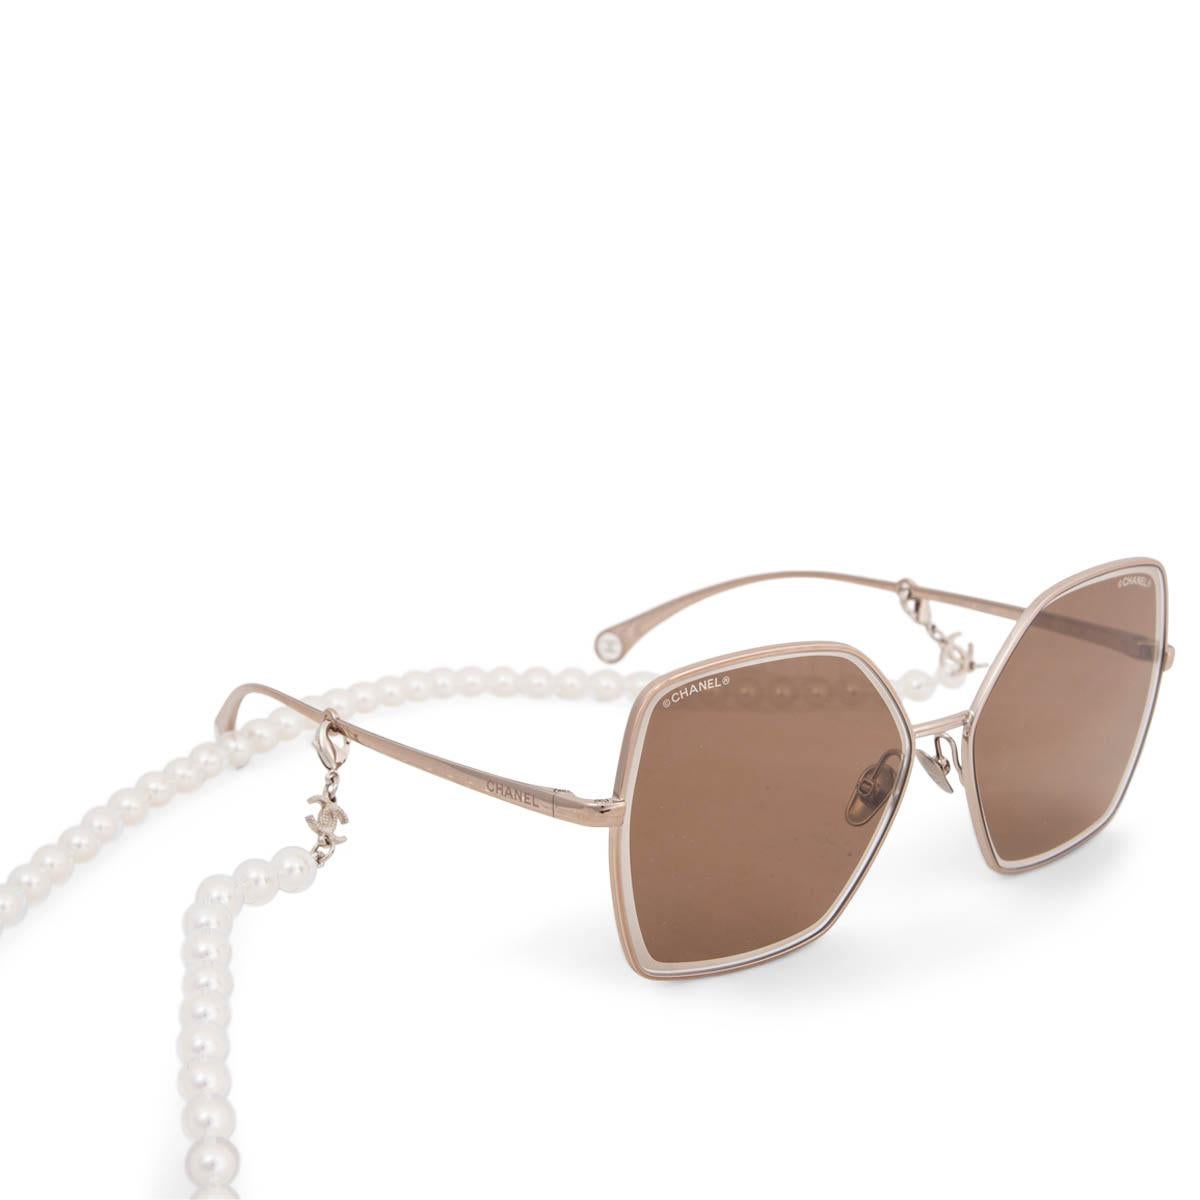 100% authentic Chanel 4262 butterfly sunglasses with brown lenses and a light gold-tone metal frame. Embellished with a removable faux pearl necklace. Have been worn and are in excellent condition. Come with case. 

2020